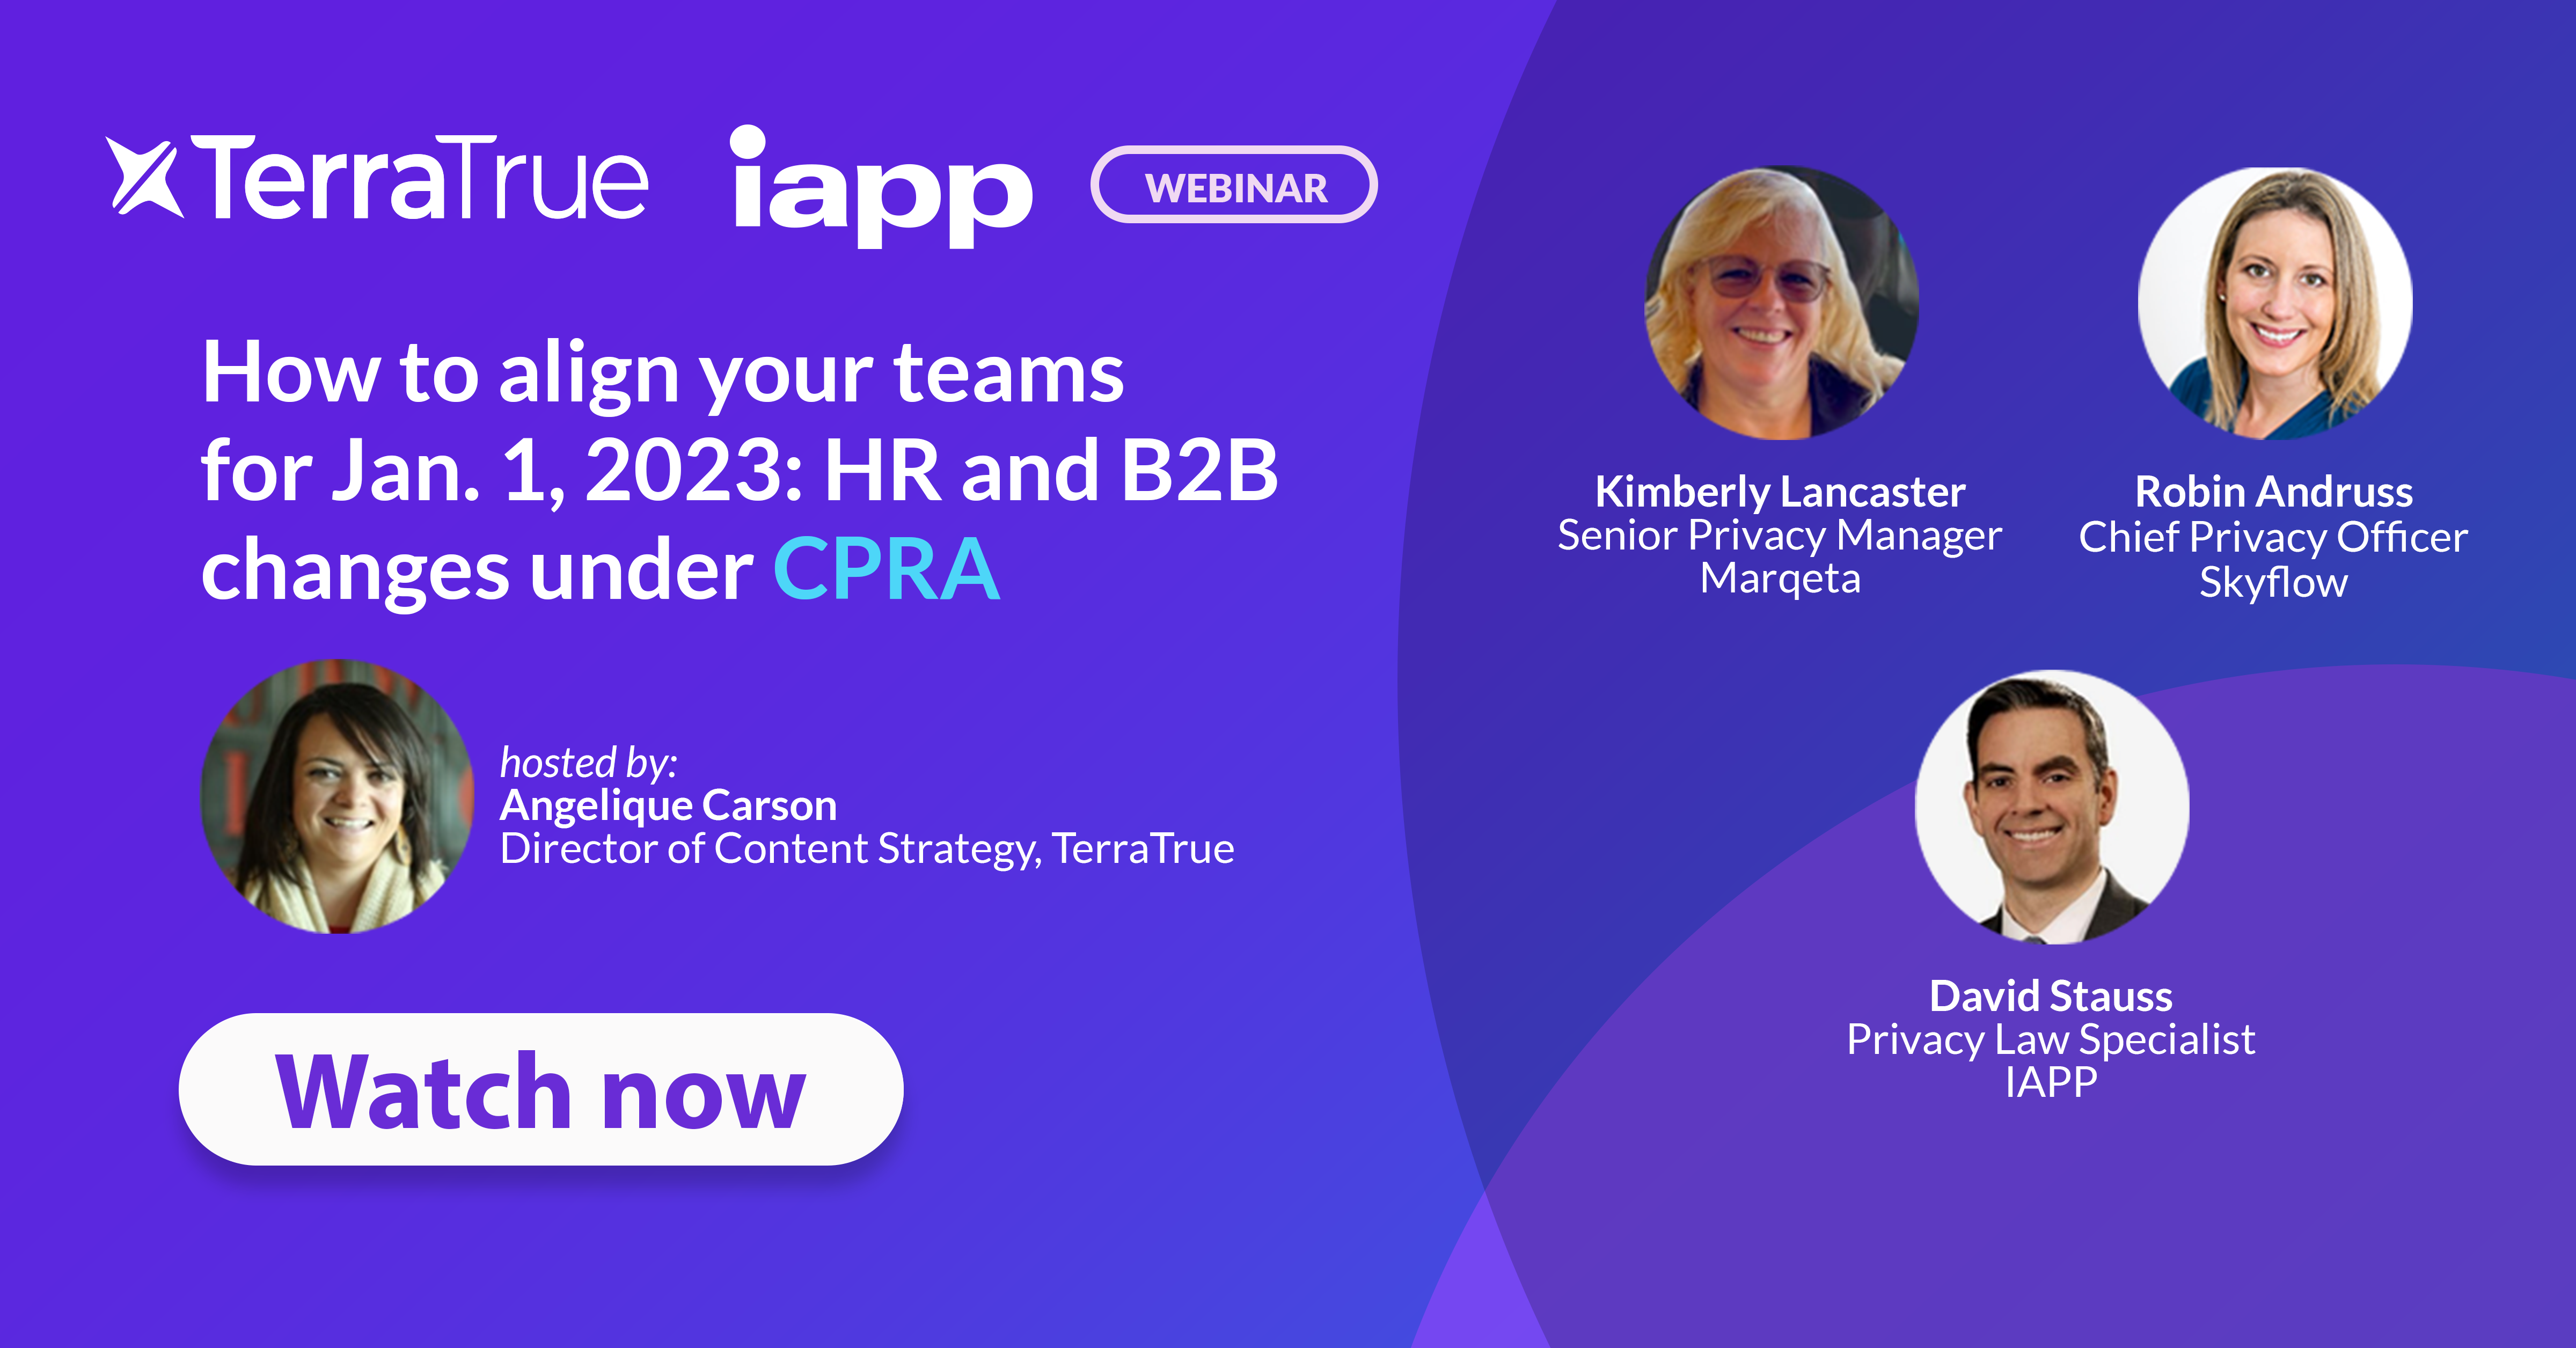 How to align your teams for Jan 1 2023 HR & B2B data